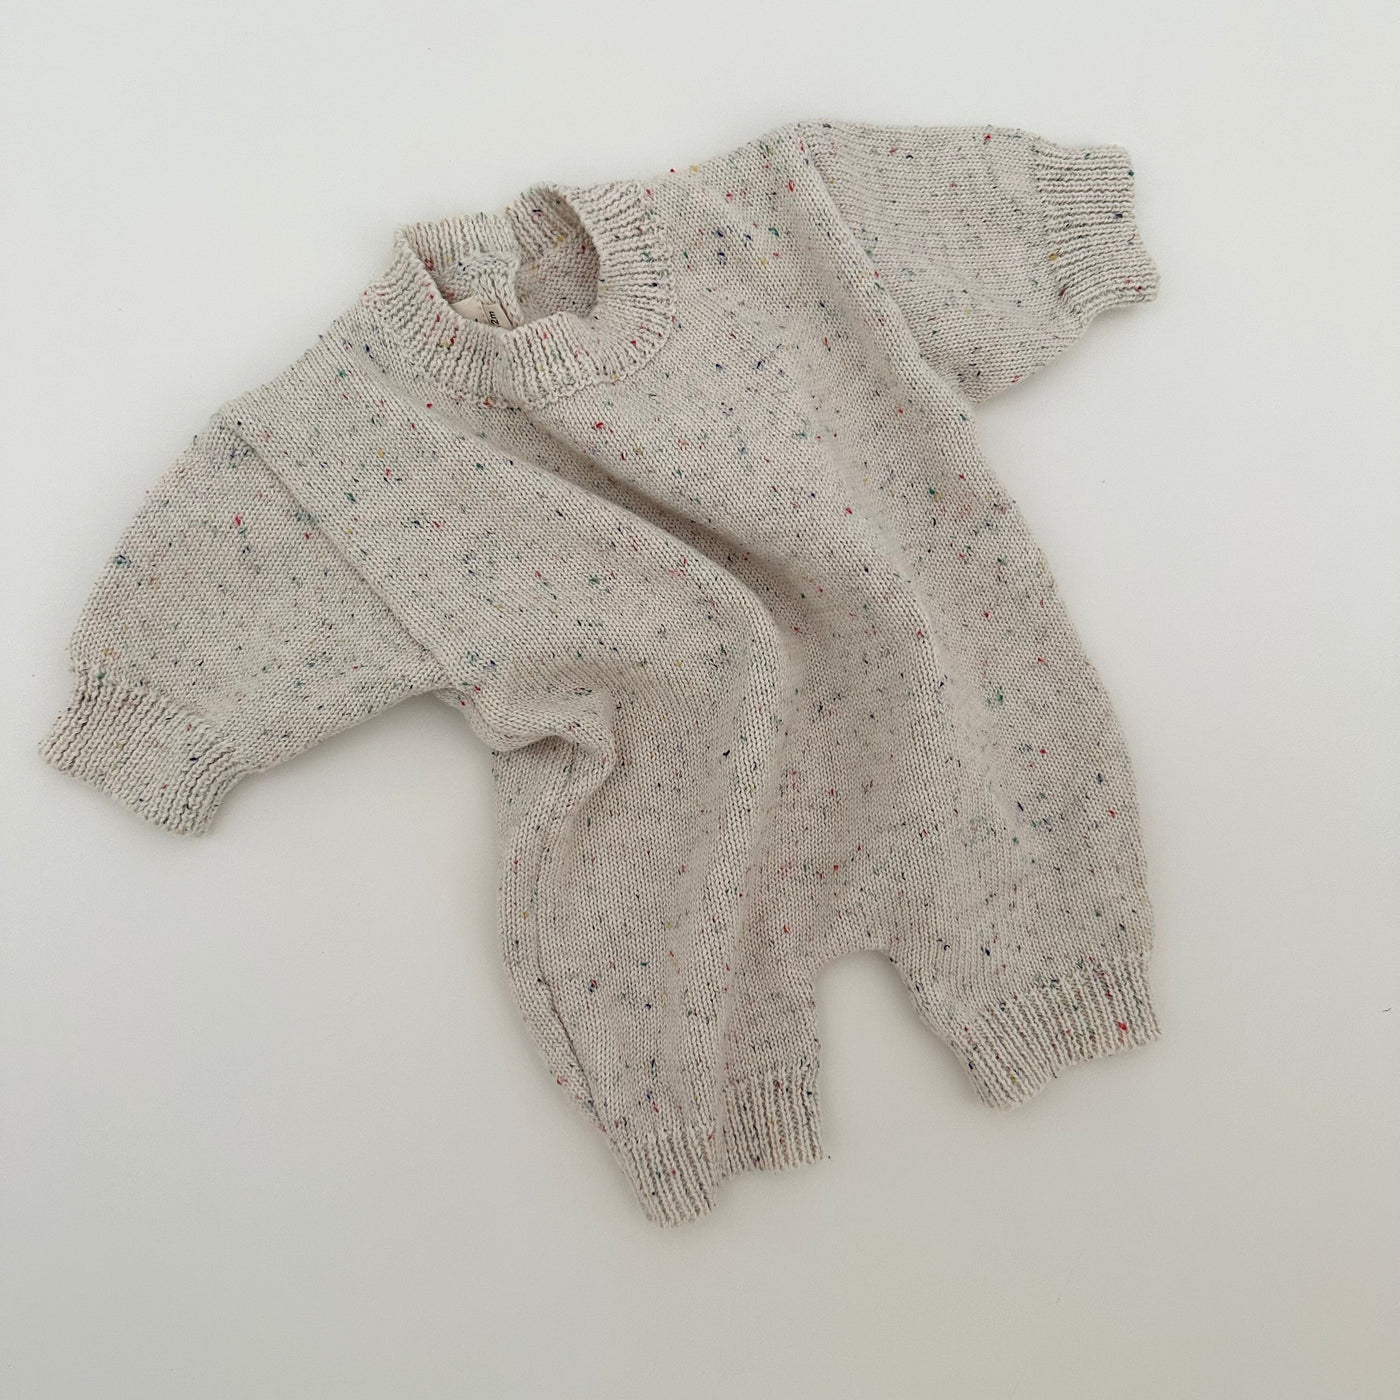 a sweater on a white surface